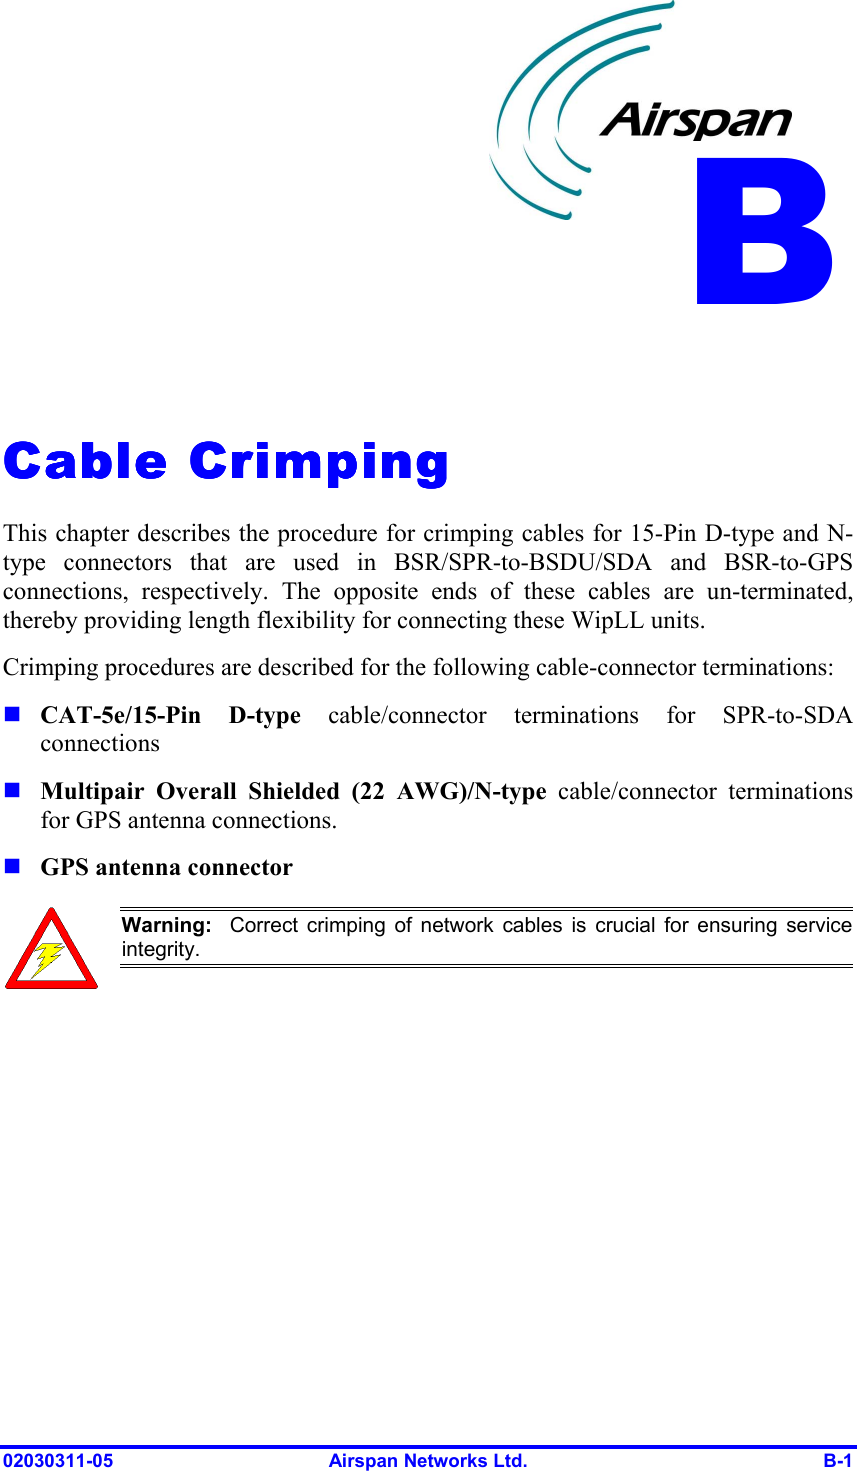  02030311-05  Airspan Networks Ltd.  B-1   Cable CrimpingCable CrimpingCable CrimpingCable Crimping    This chapter describes the procedure for crimping cables for 15-Pin D-type and N-type connectors that are used in BSR/SPR-to-BSDU/SDA and BSR-to-GPS connections, respectively. The opposite ends of these cables are un-terminated, thereby providing length flexibility for connecting these WipLL units. Crimping procedures are described for the following cable-connector terminations: ! CAT-5e/15-Pin D-type cable/connector terminations for SPR-to-SDA connections ! Multipair Overall Shielded (22 AWG)/N-type cable/connector terminations for GPS antenna connections. ! GPS antenna connector  Warning:  Correct crimping of network cables is crucial for ensuring serviceintegrity.  B